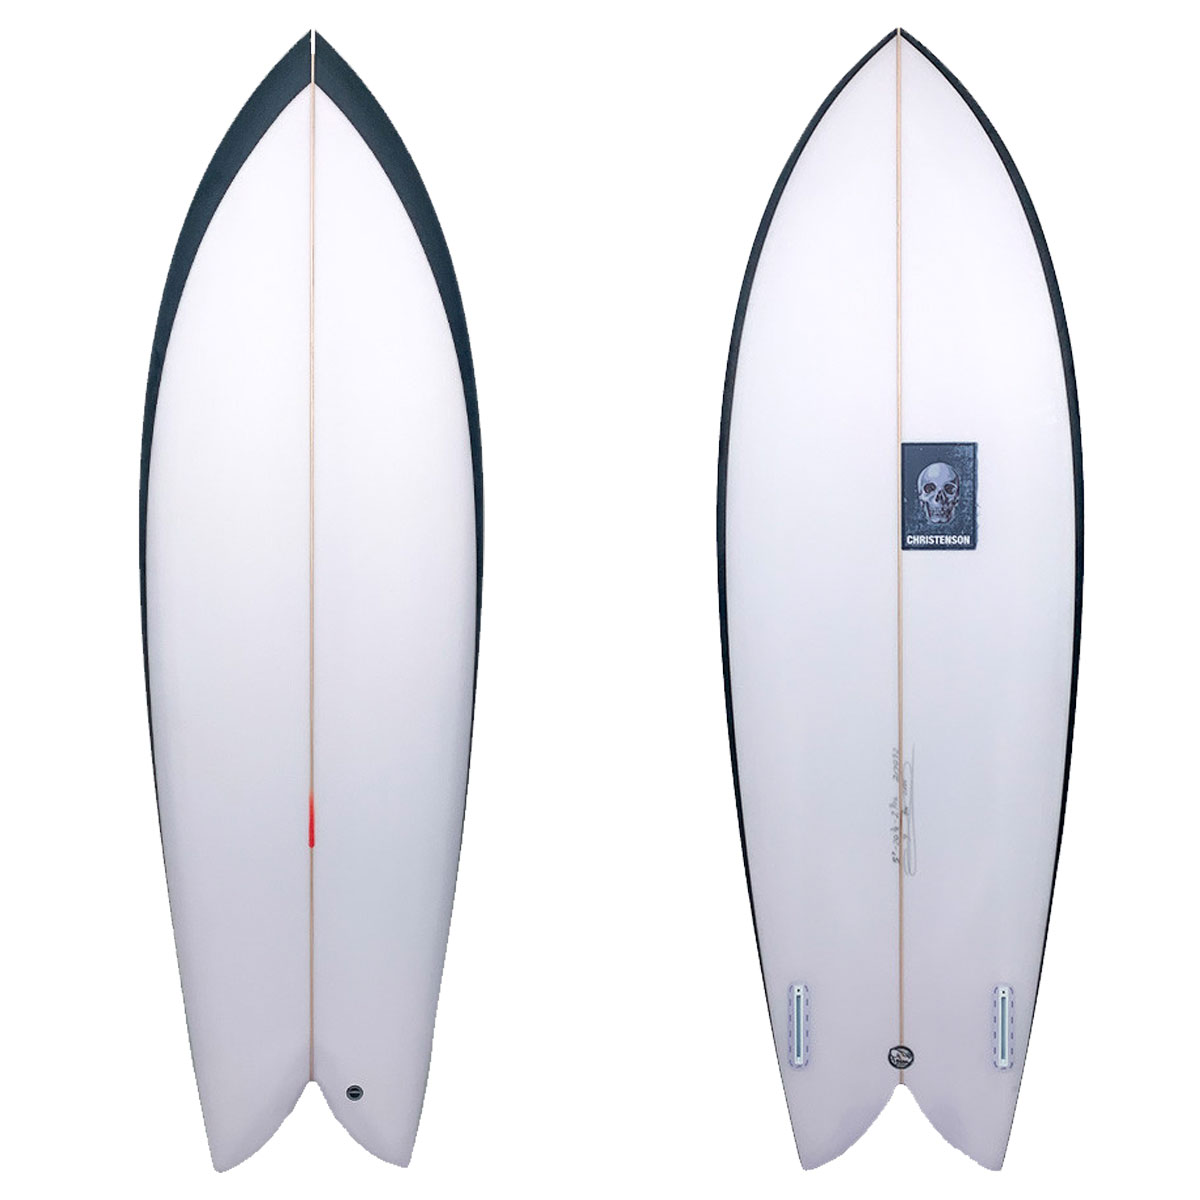 Christenson Surfboards Fish and their advantages